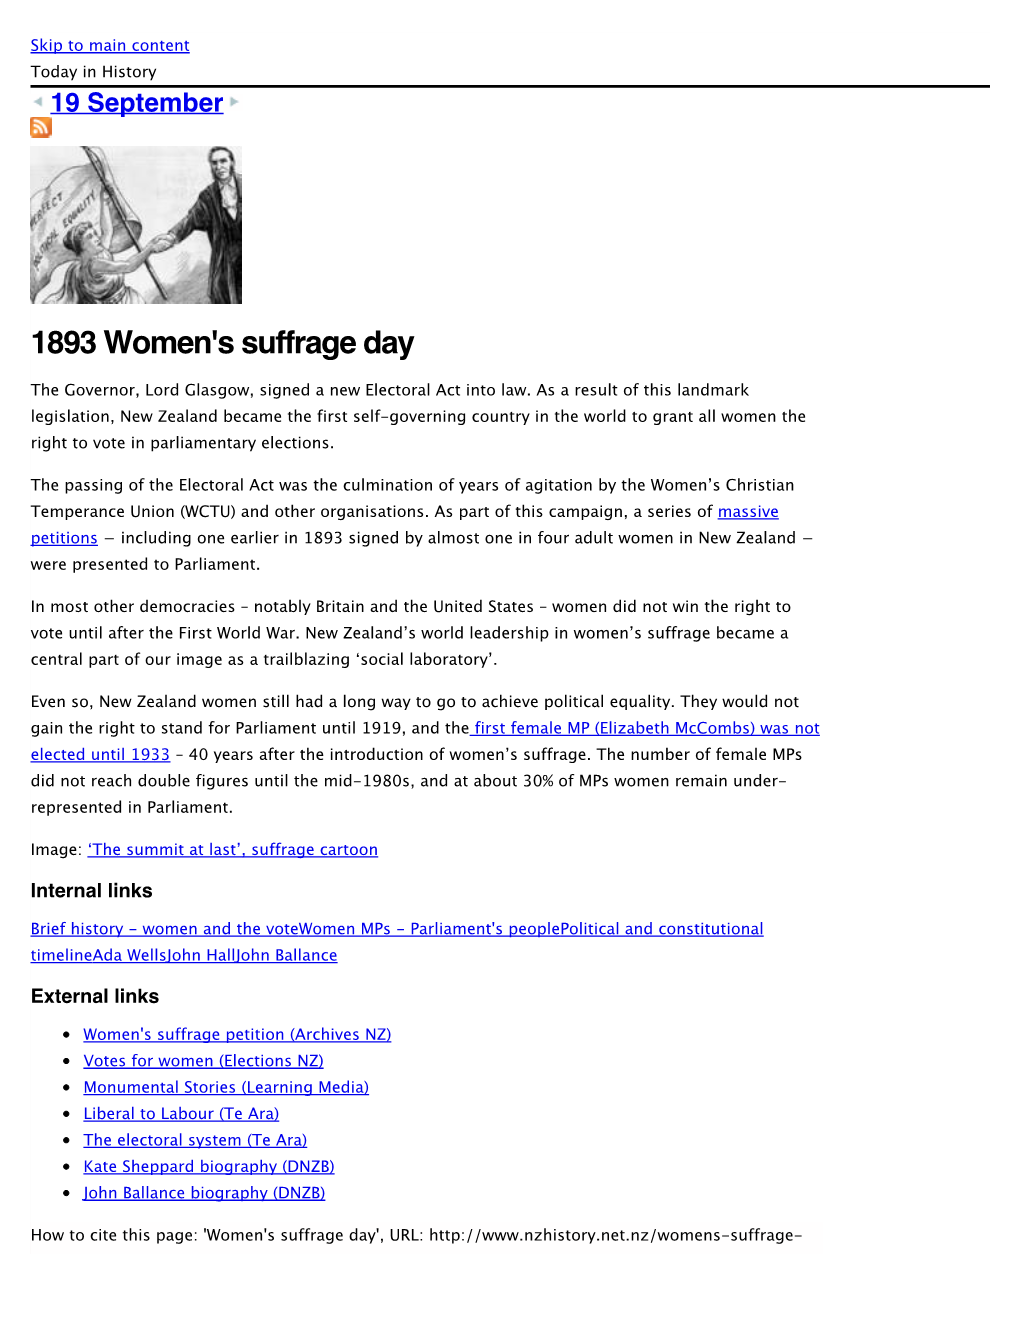 Women's Suffrage Day | Nzhistory, New Zealand History Online